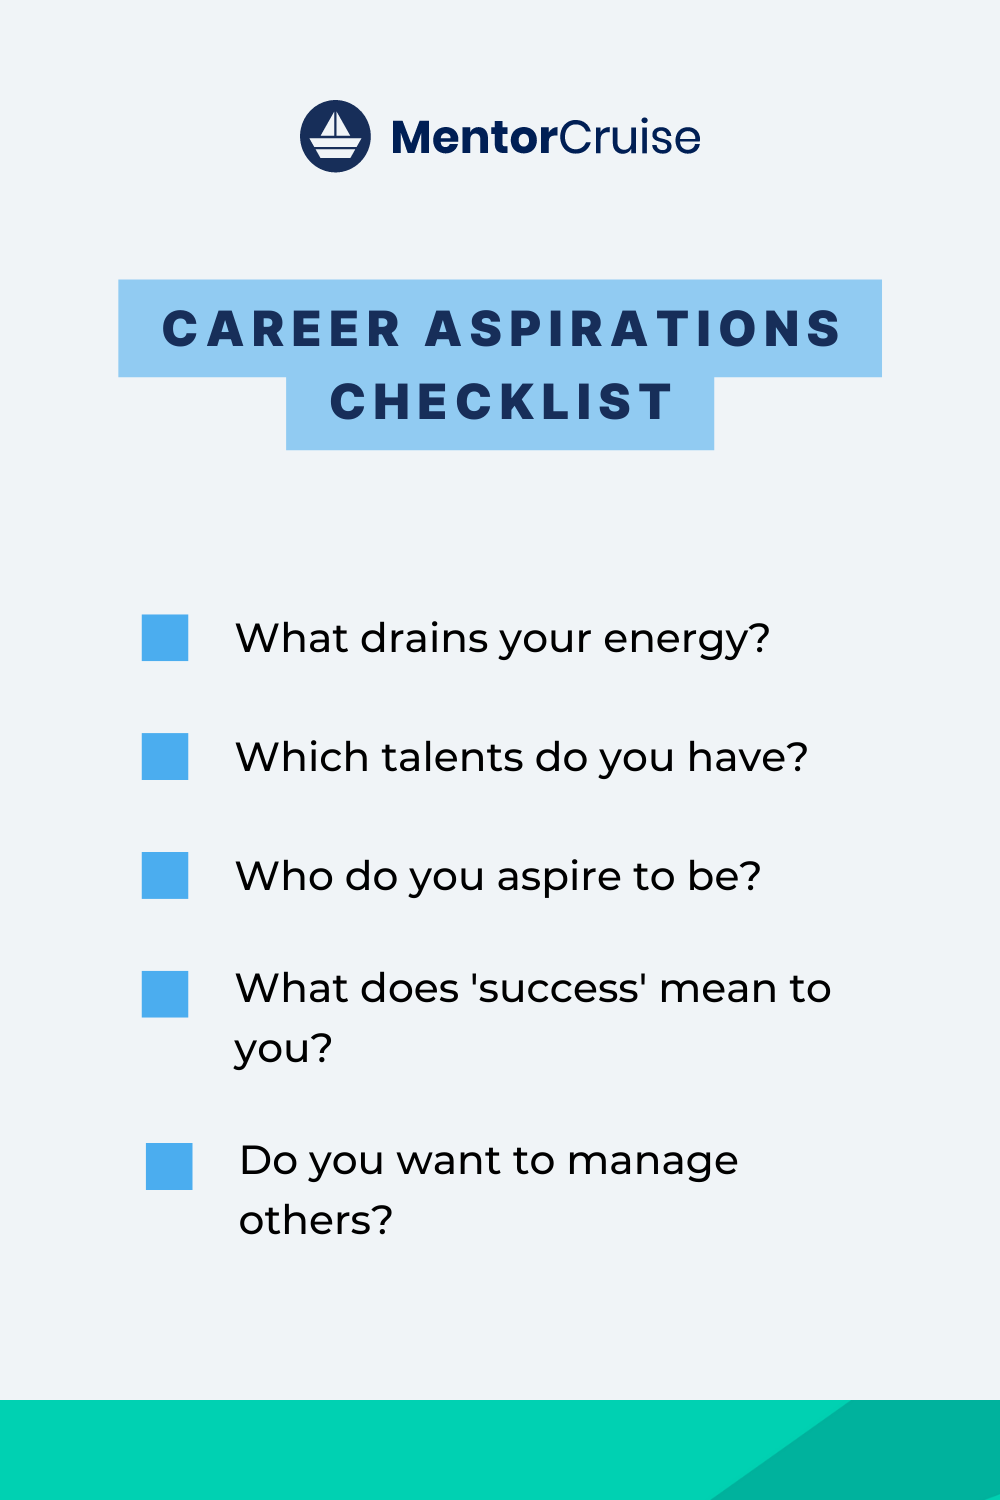 please tell us about your career aspirations